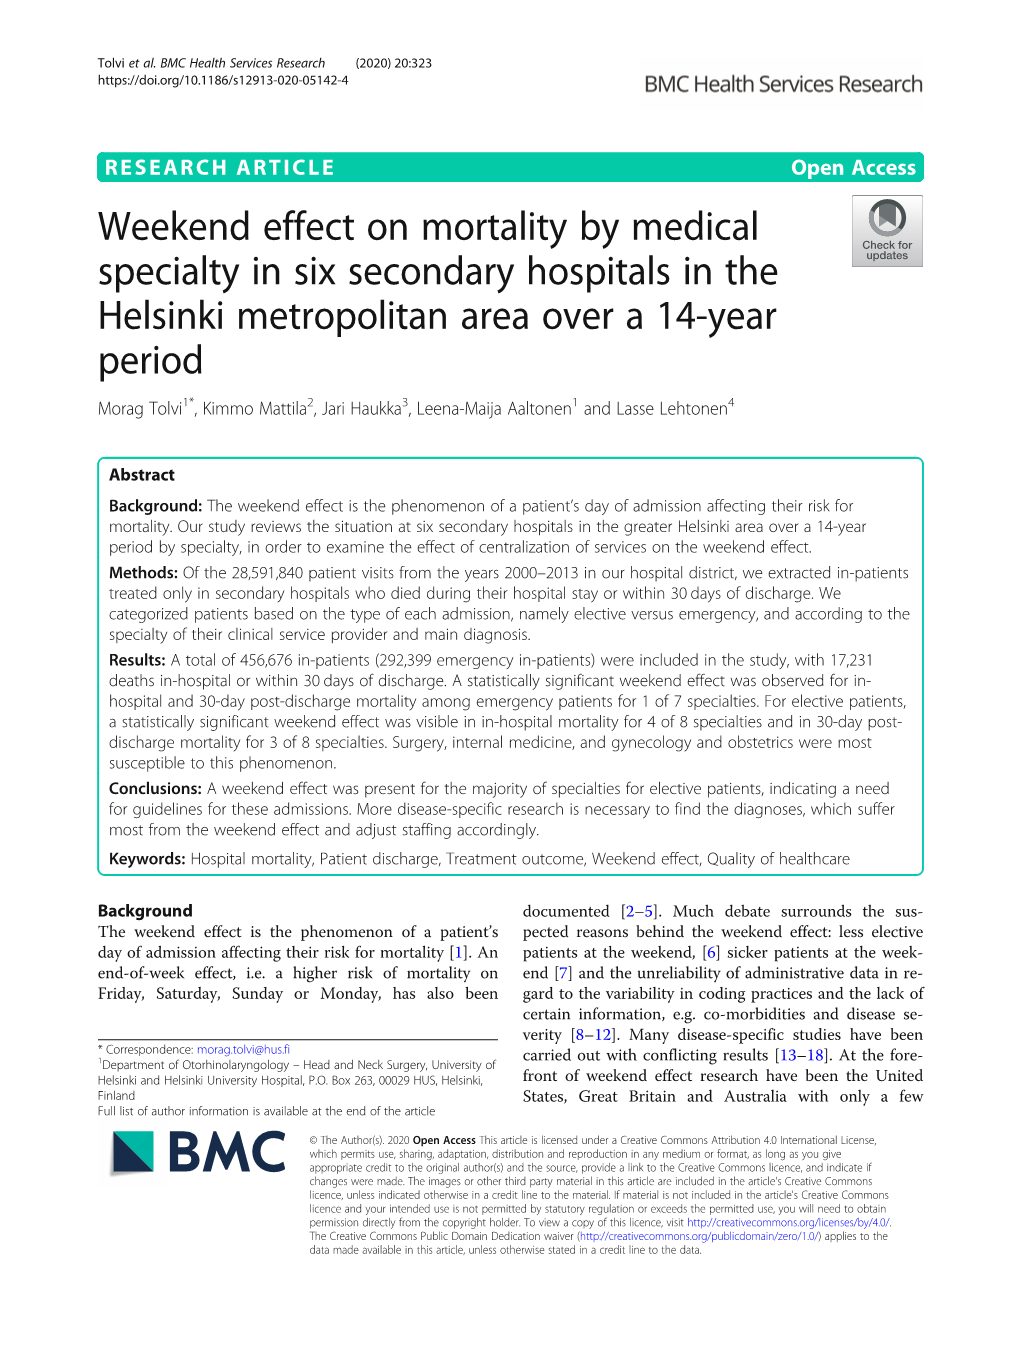 Weekend Effect on Mortality by Medical Specialty in Six Secondary Hospitals in the Helsinki Metropolitan Area Over a 14-Year